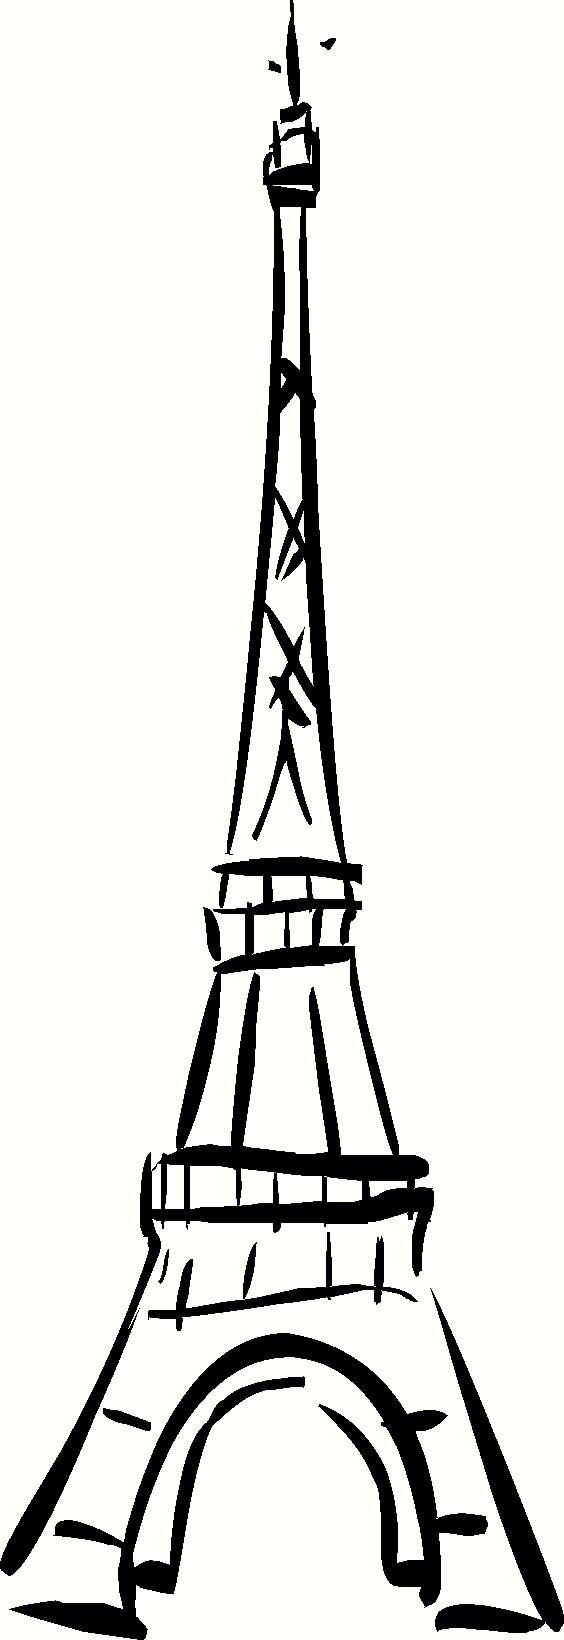 Eiffel Tower Clipart Black And White Free download on